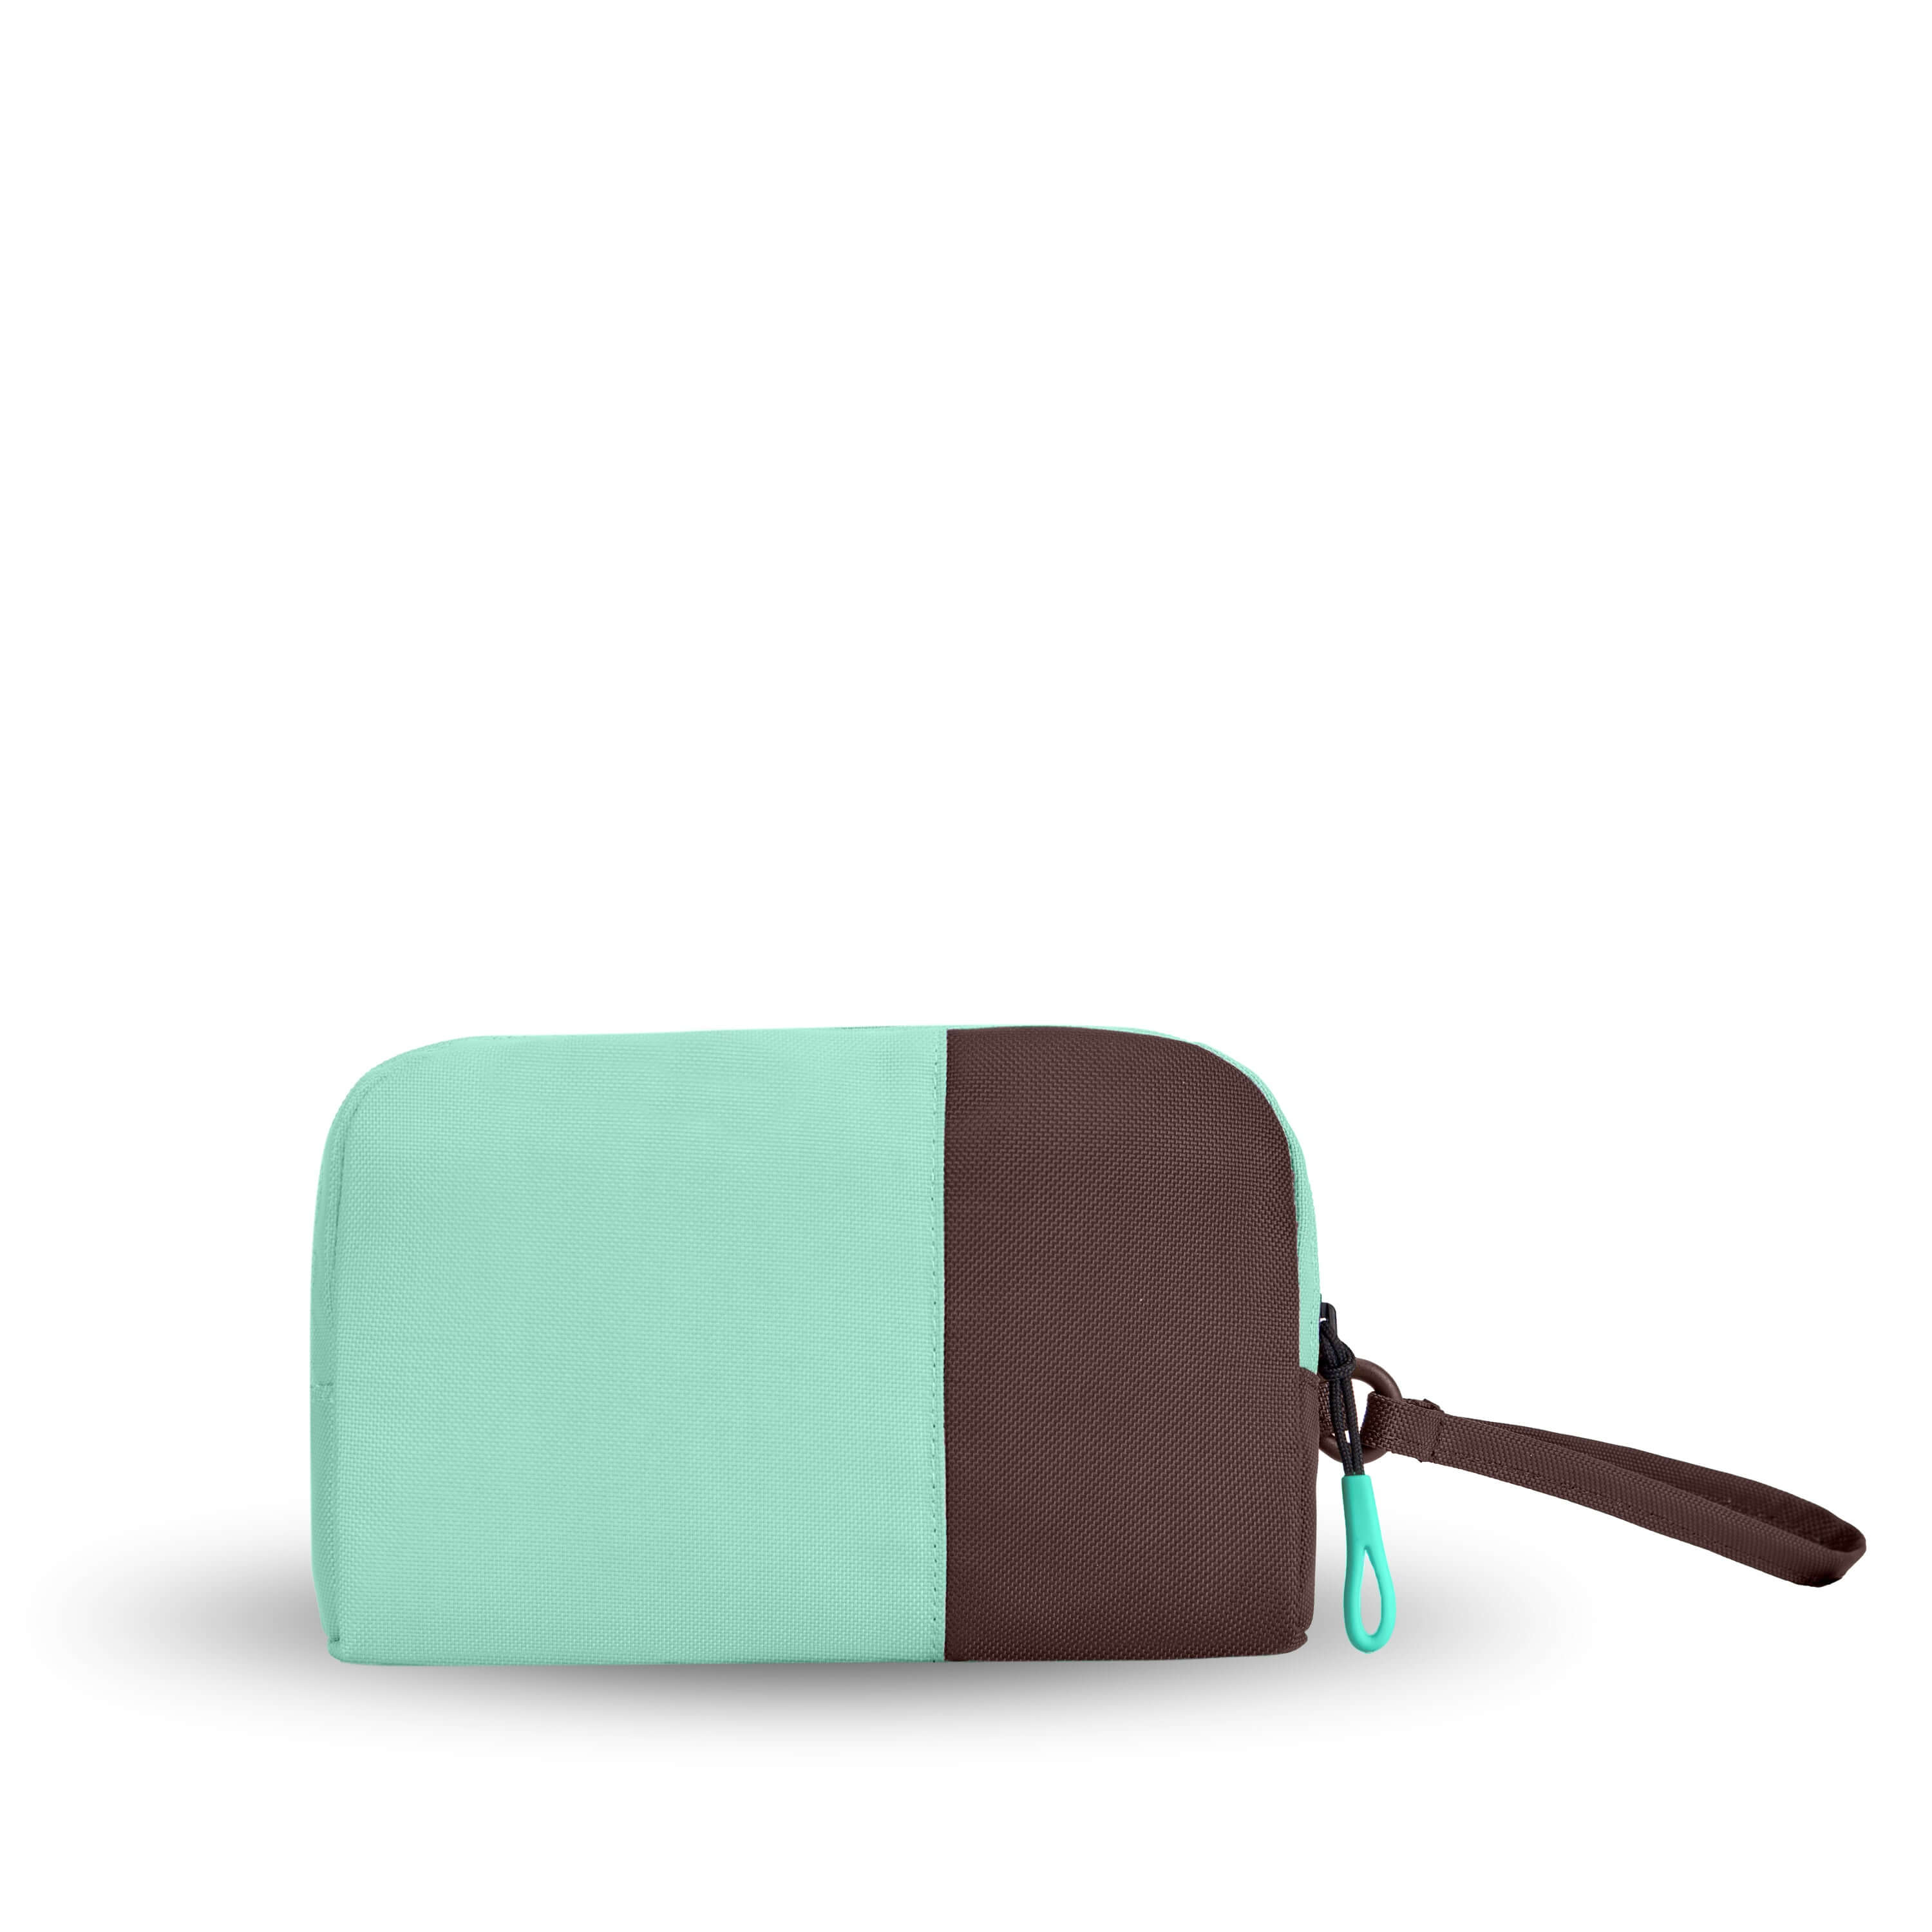 Back view of Sherpani travel accessory, the Jolie in Seagreen, in small size. The pouch is two-toned in light green and brown. It features a brown wristlet strap and an easy-pull zipper accented in light green.